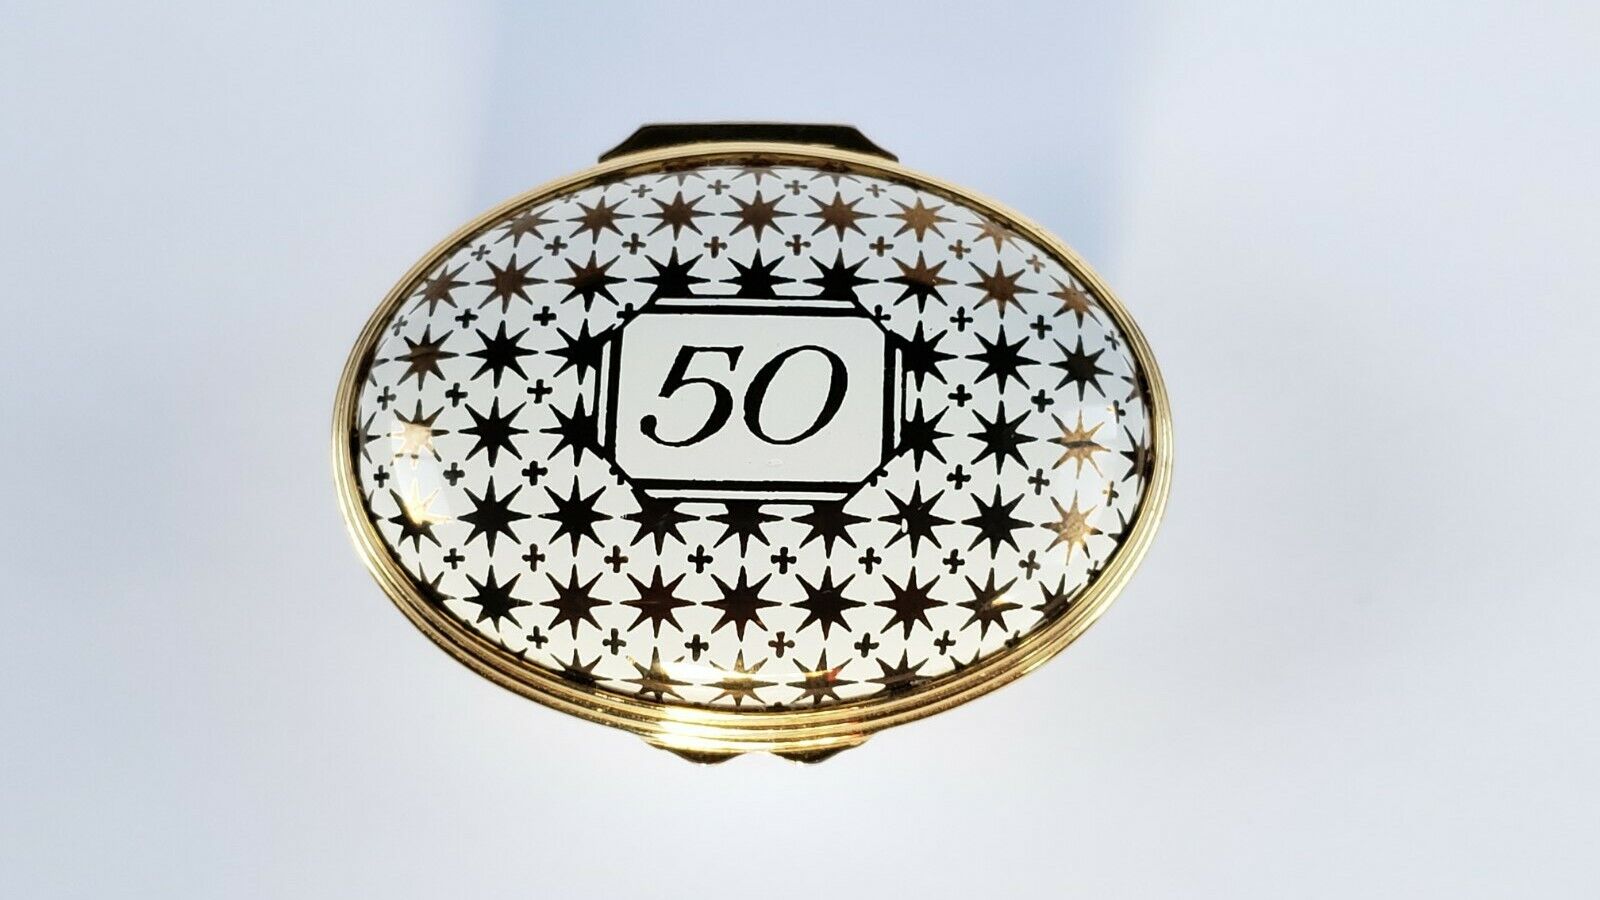 Halcyon Days Enamel Box, 50 Years The Crystal Charity, England